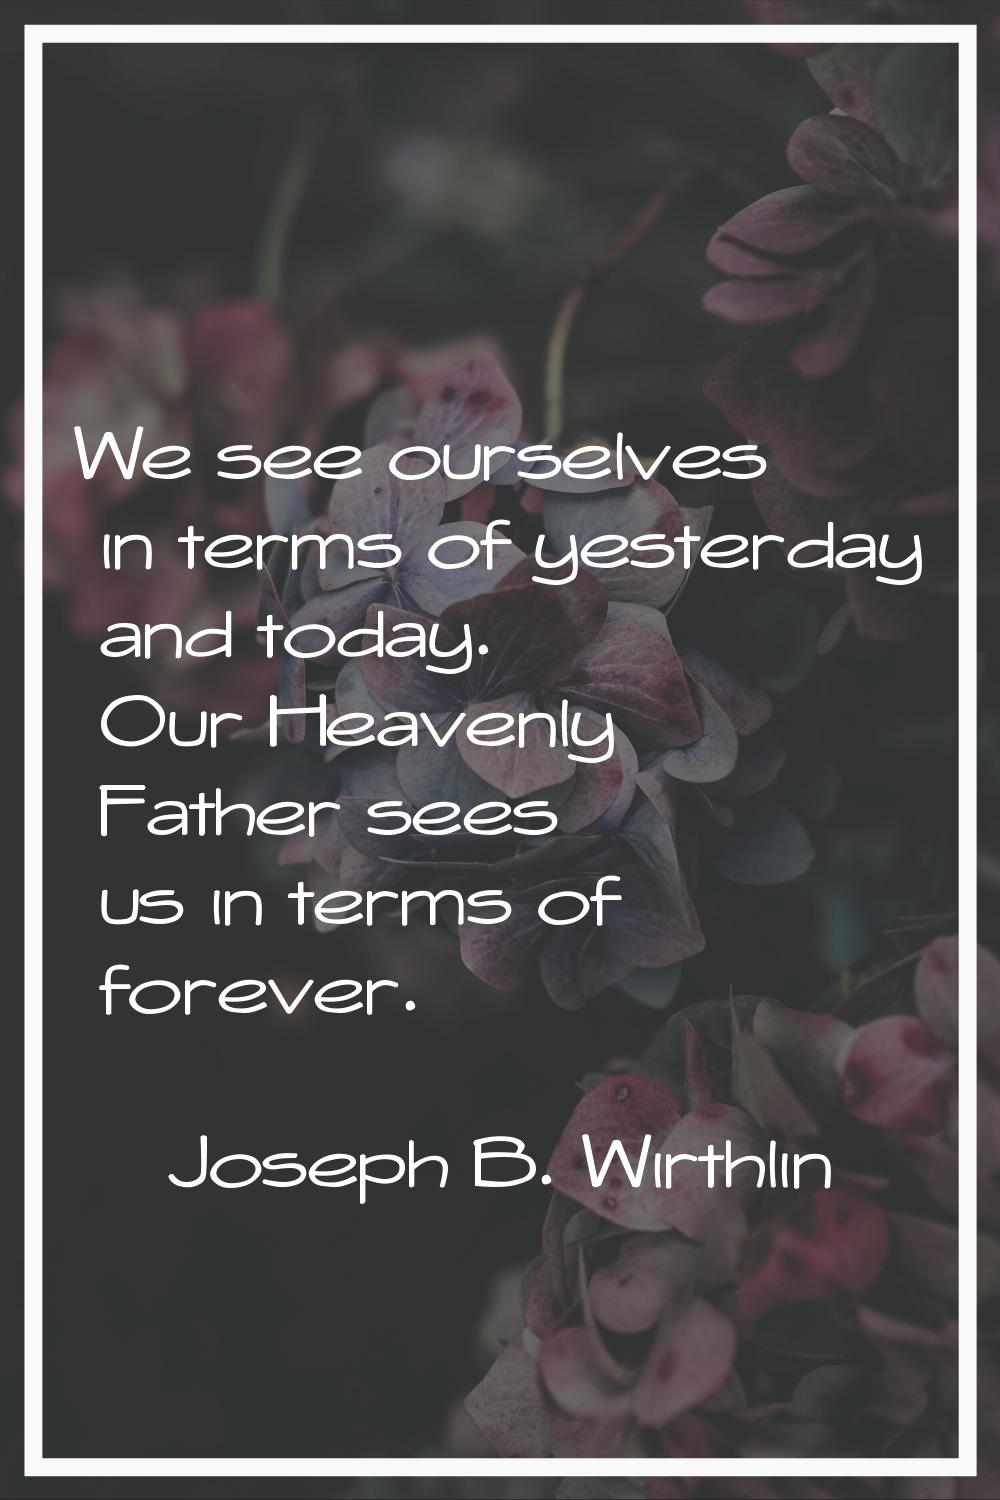 We see ourselves in terms of yesterday and today. Our Heavenly Father sees us in terms of forever.